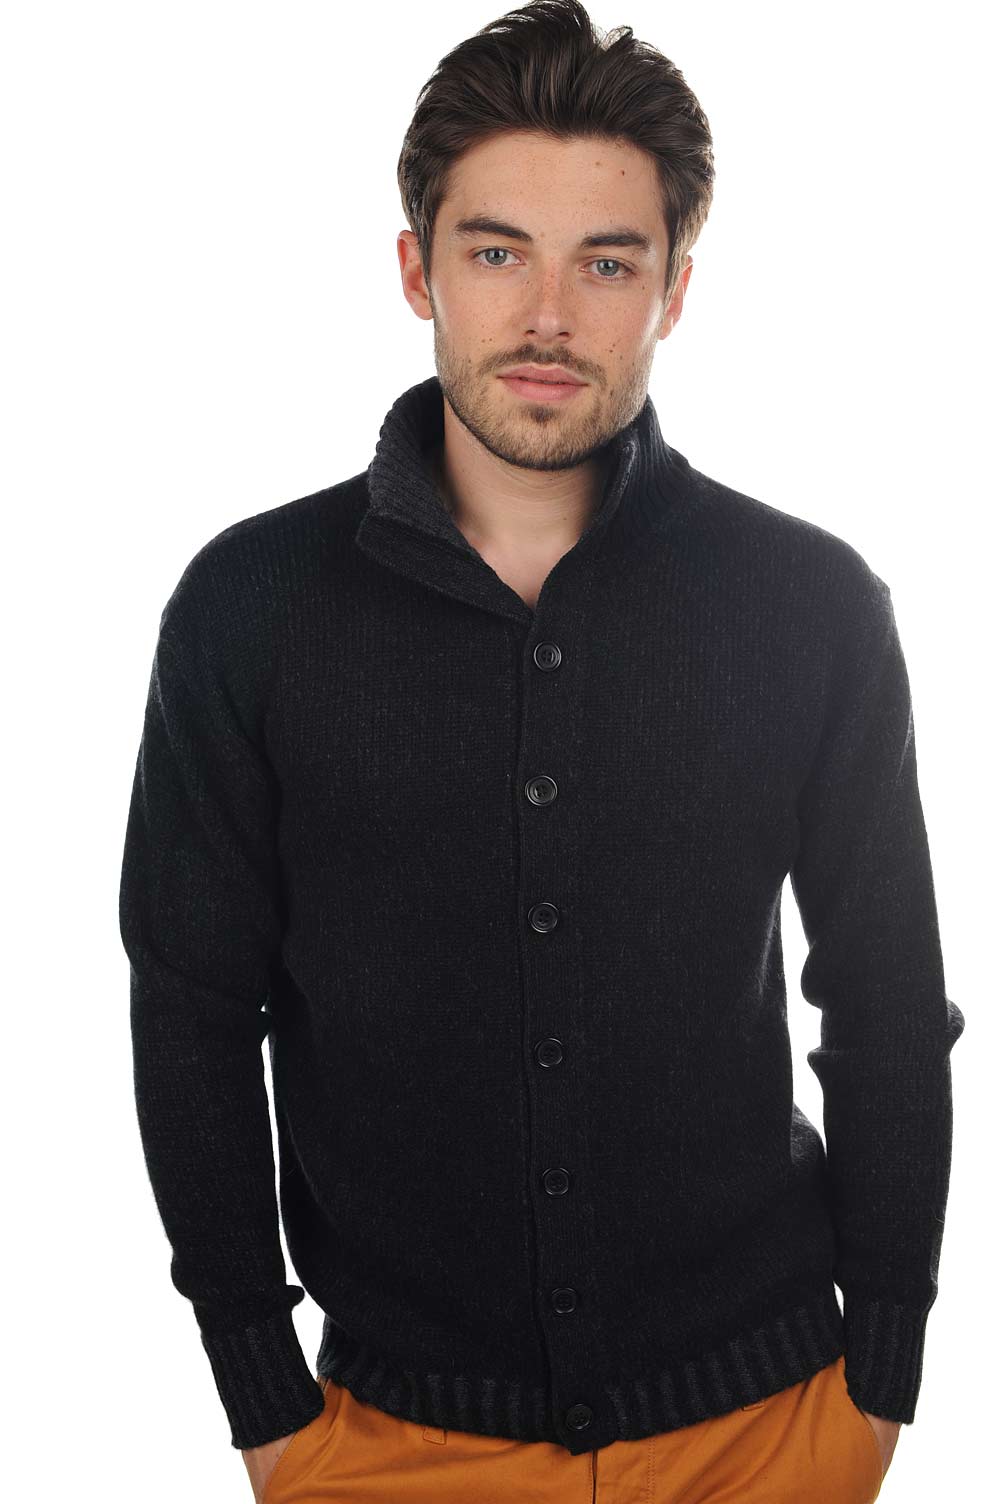 Cachemire pull homme jo noir anthracite chine l